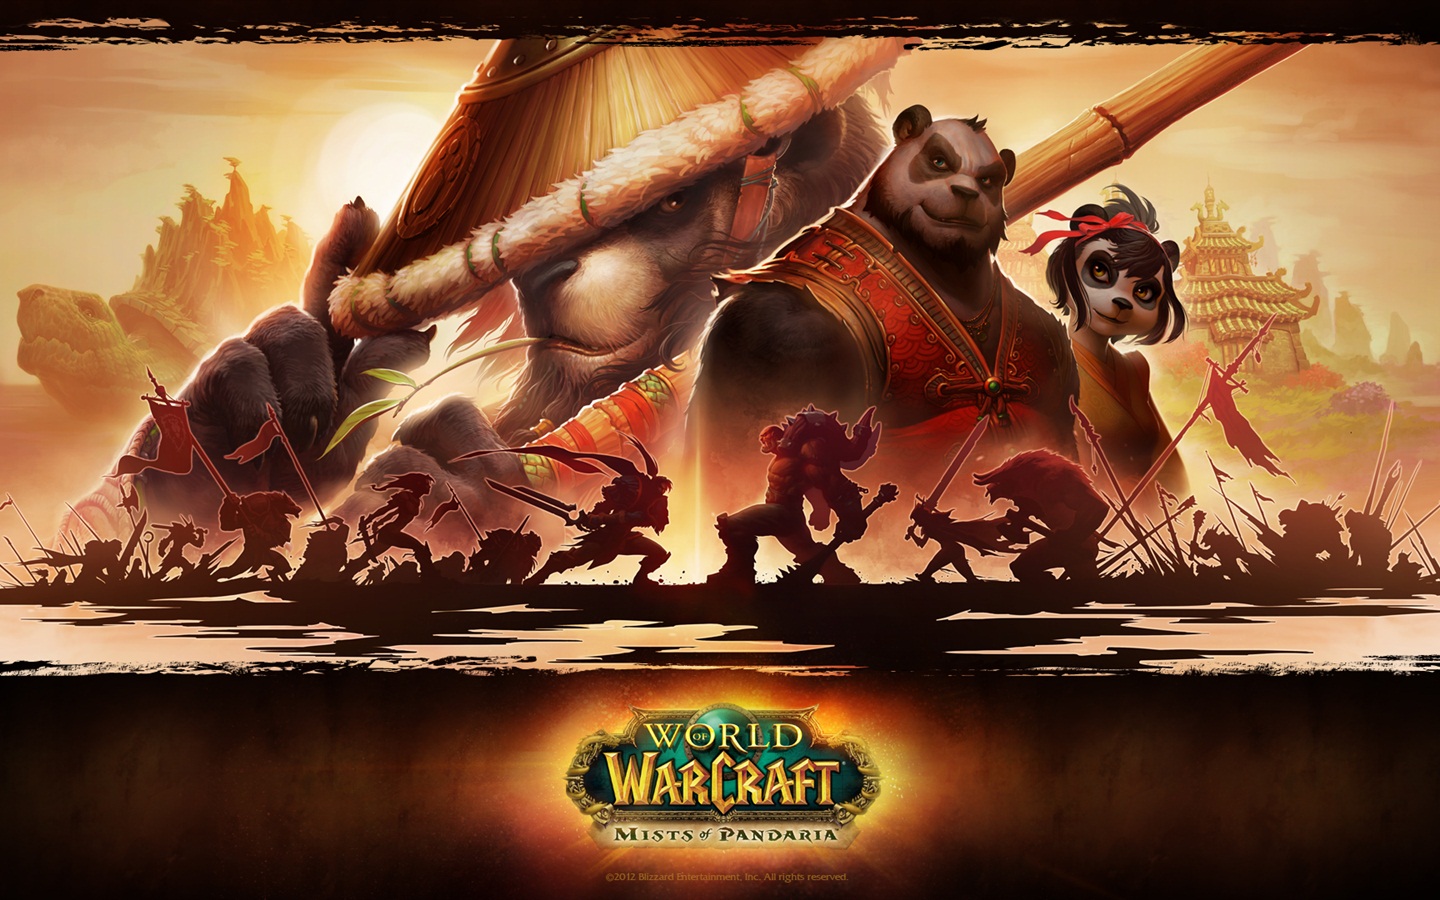 World of Warcraft: Mists of Pandaria HD wallpapers #7 - 1440x900